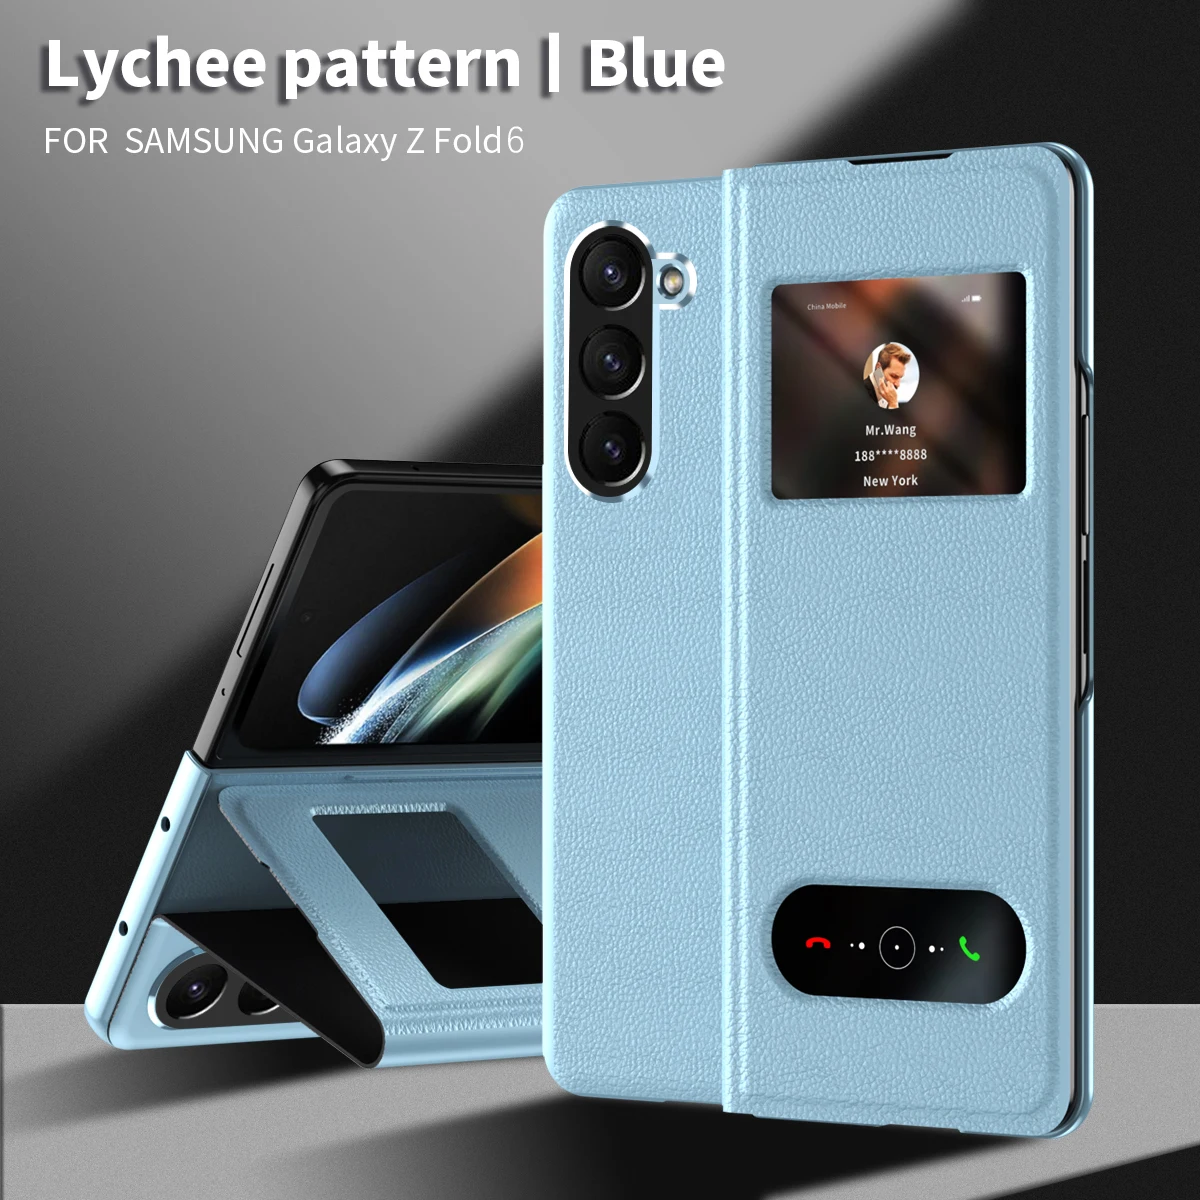 

Magnetic Close Business Style Leather PC Flip Cover Case for Samsung Galaxy Z Fold 5 4 3 Smart View Call ID Shows Answer Phone